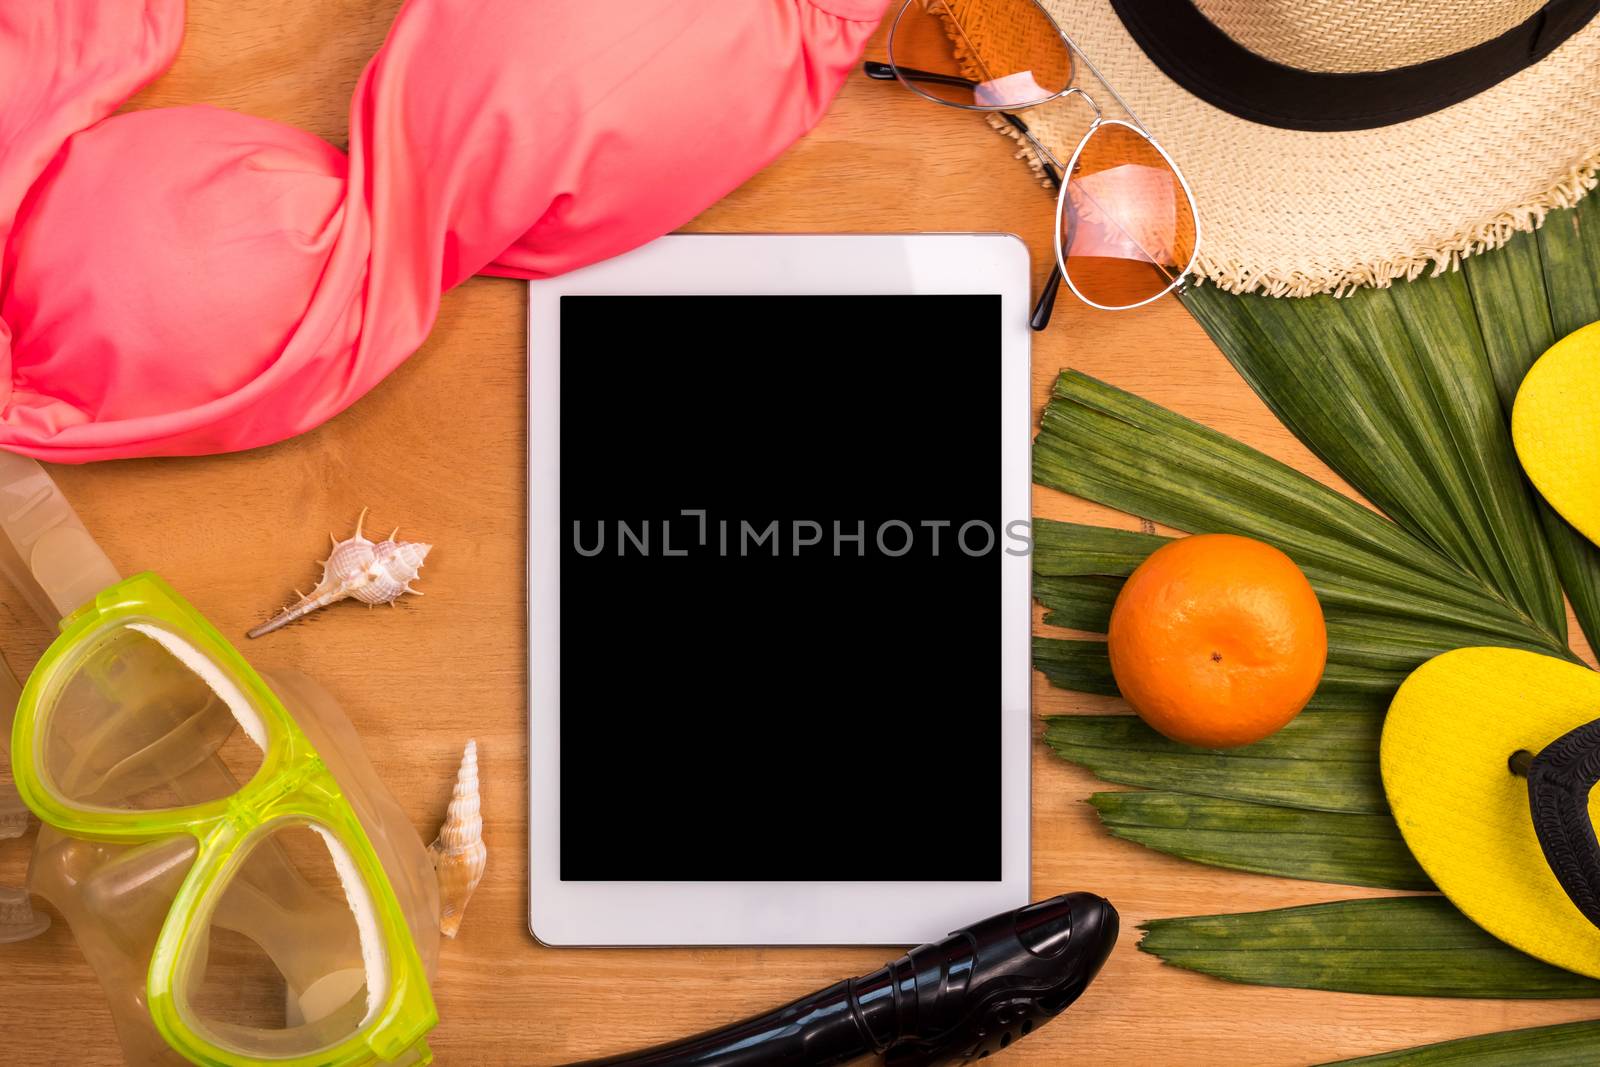 Tablet and Accerssories for summertime on a wooden background.